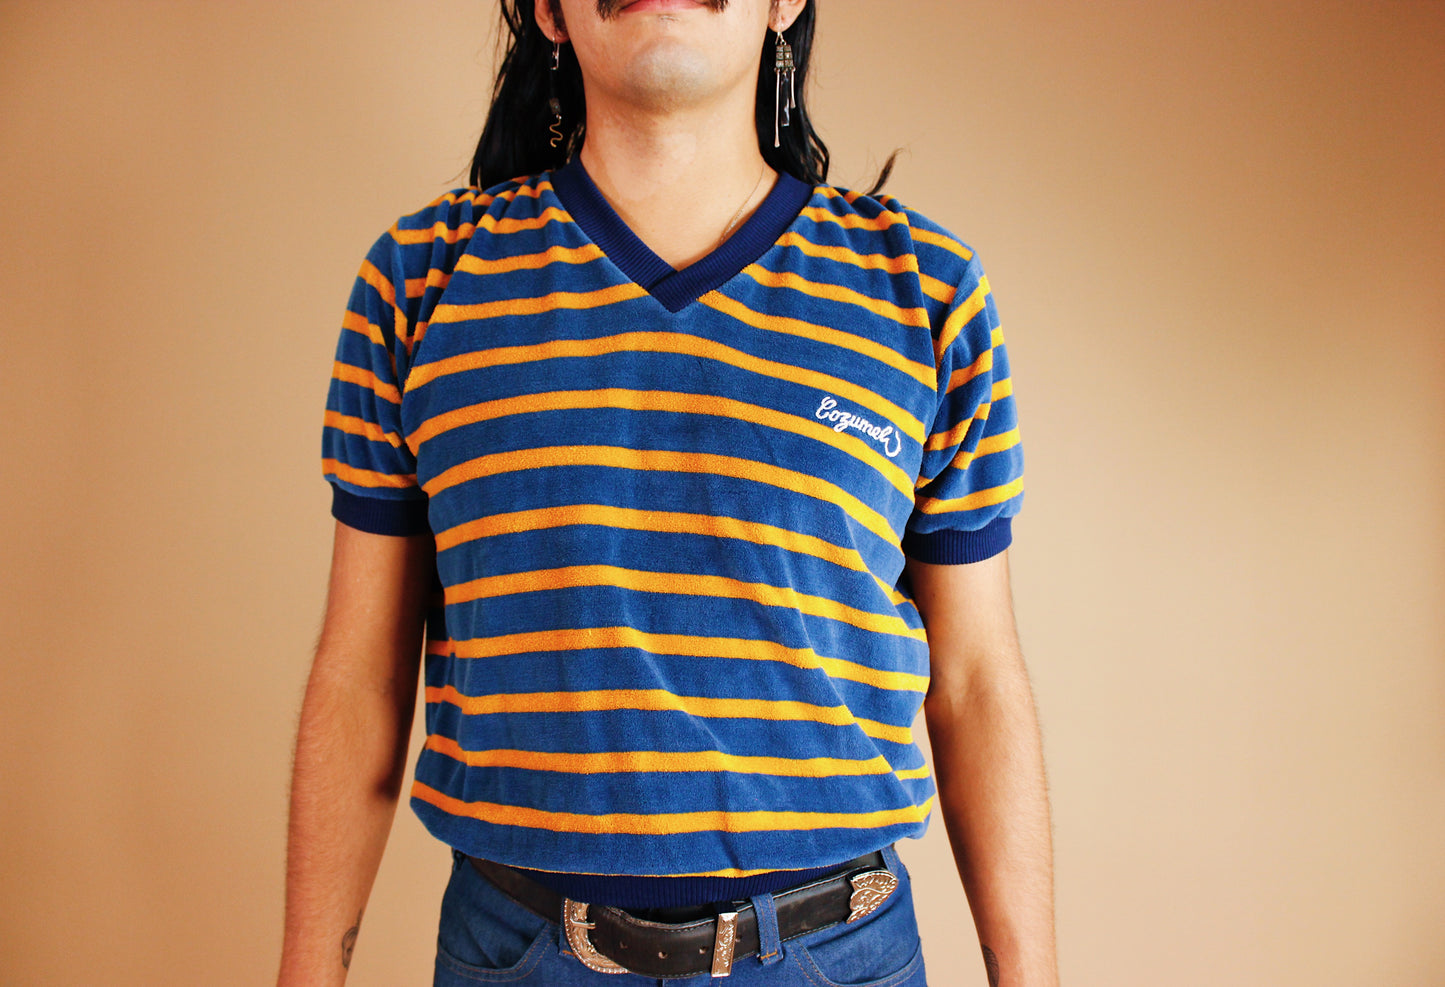 1970s/80s Striped Terry Tee